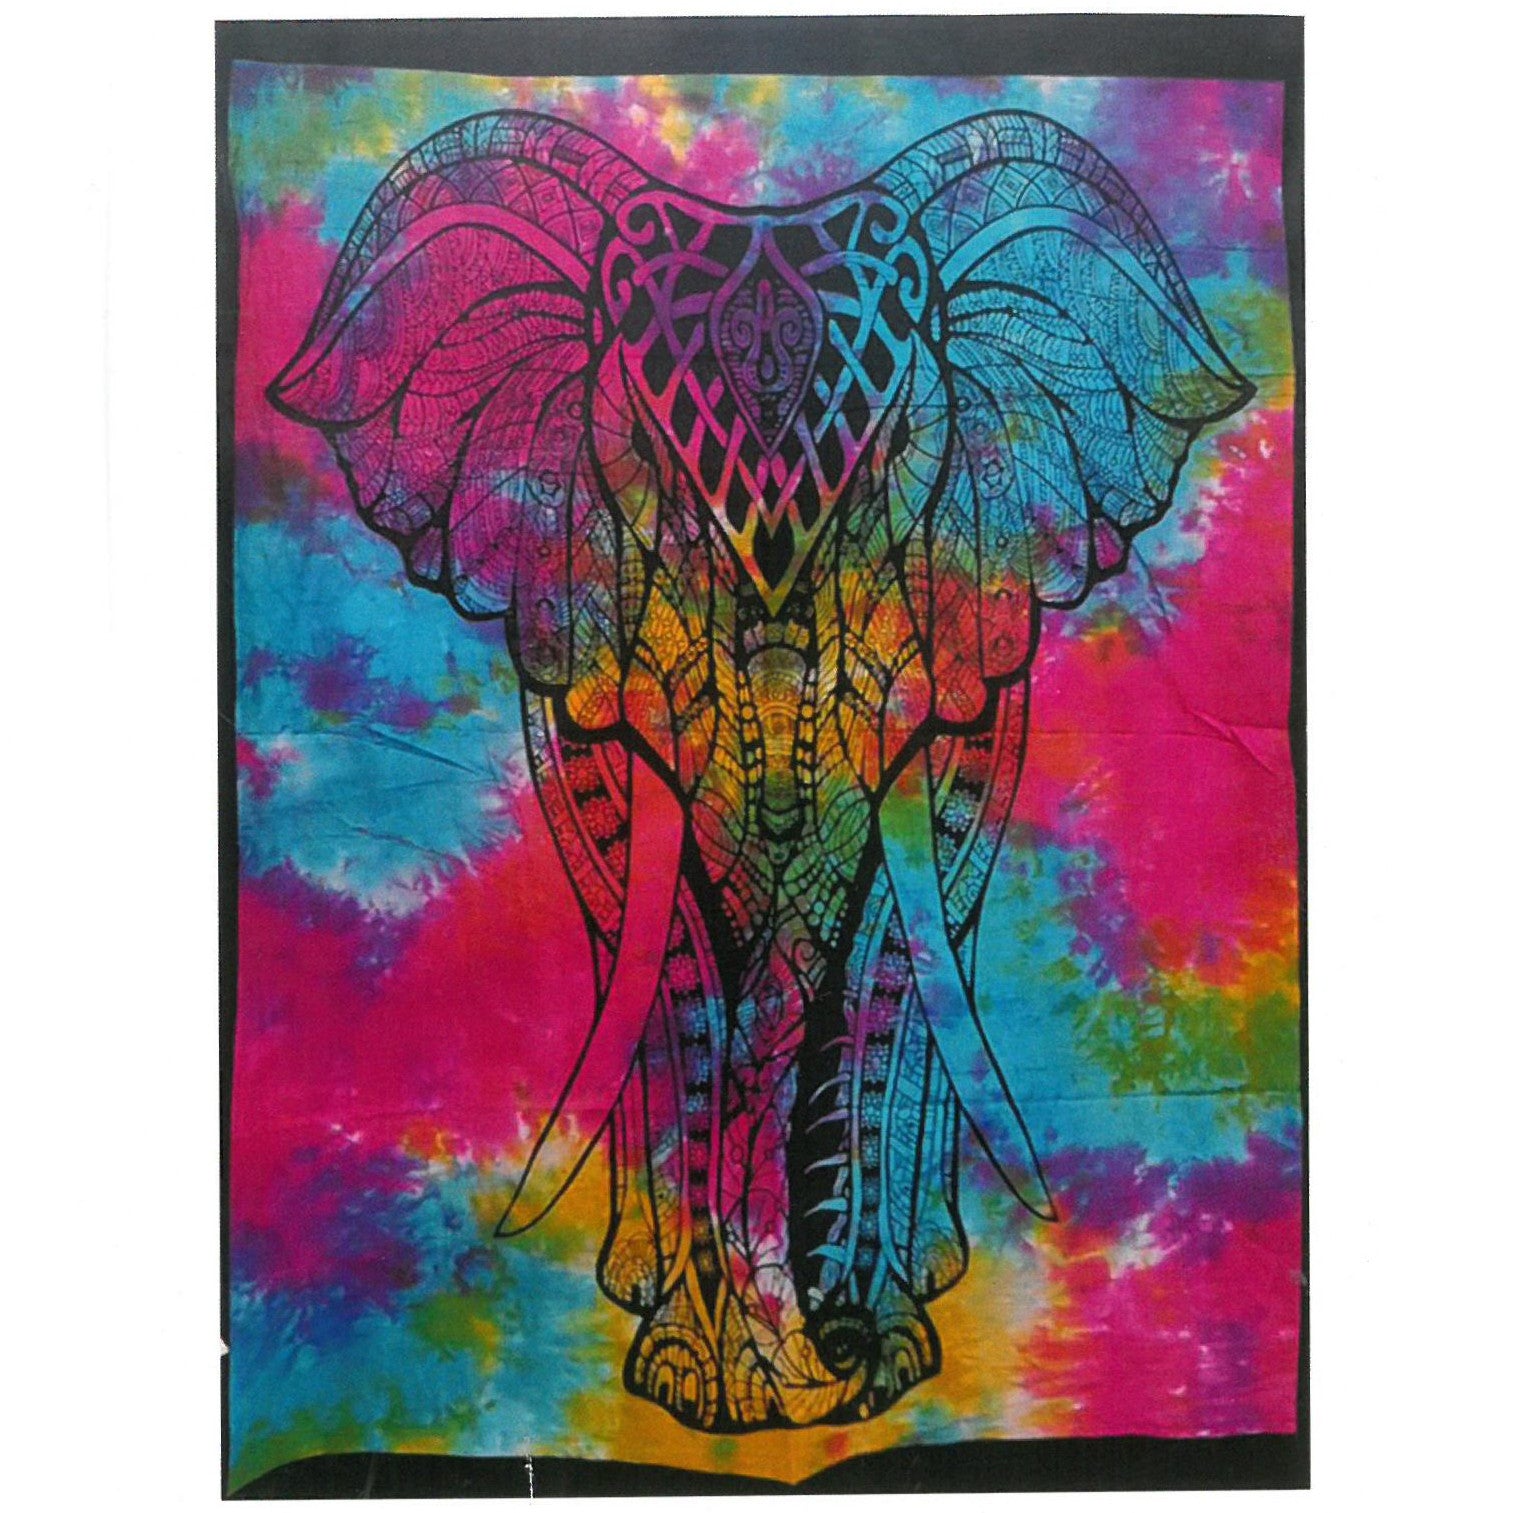 View Cotton Wall Art Elephant information